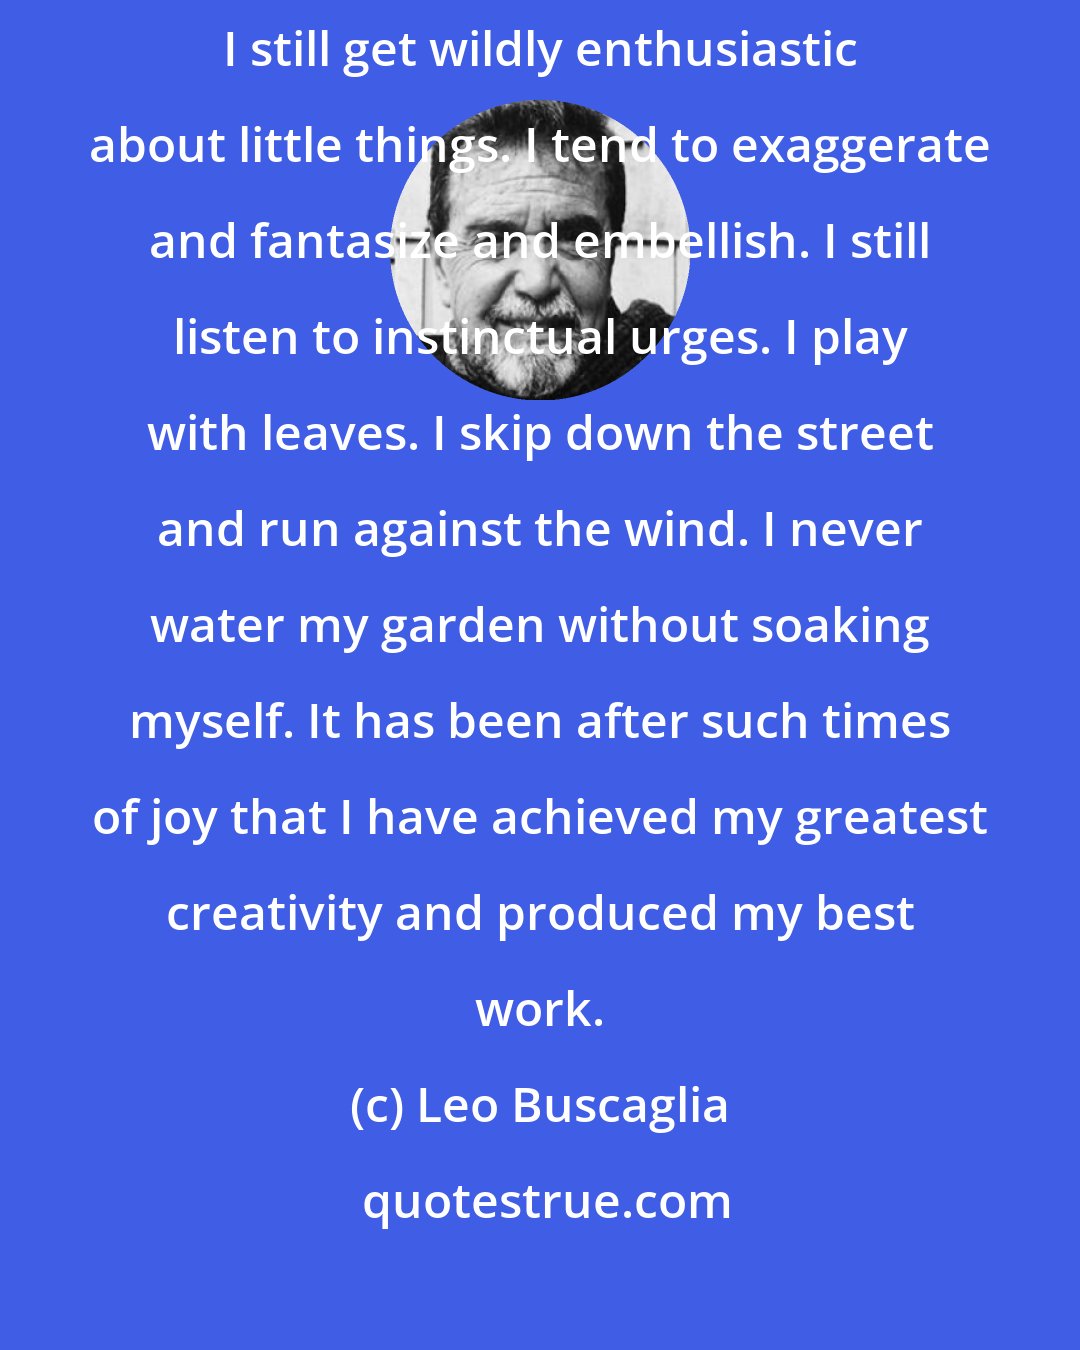 Leo Buscaglia: I am often accused of being childish. I prefer to interpret that as child-like. I still get wildly enthusiastic about little things. I tend to exaggerate and fantasize and embellish. I still listen to instinctual urges. I play with leaves. I skip down the street and run against the wind. I never water my garden without soaking myself. It has been after such times of joy that I have achieved my greatest creativity and produced my best work.